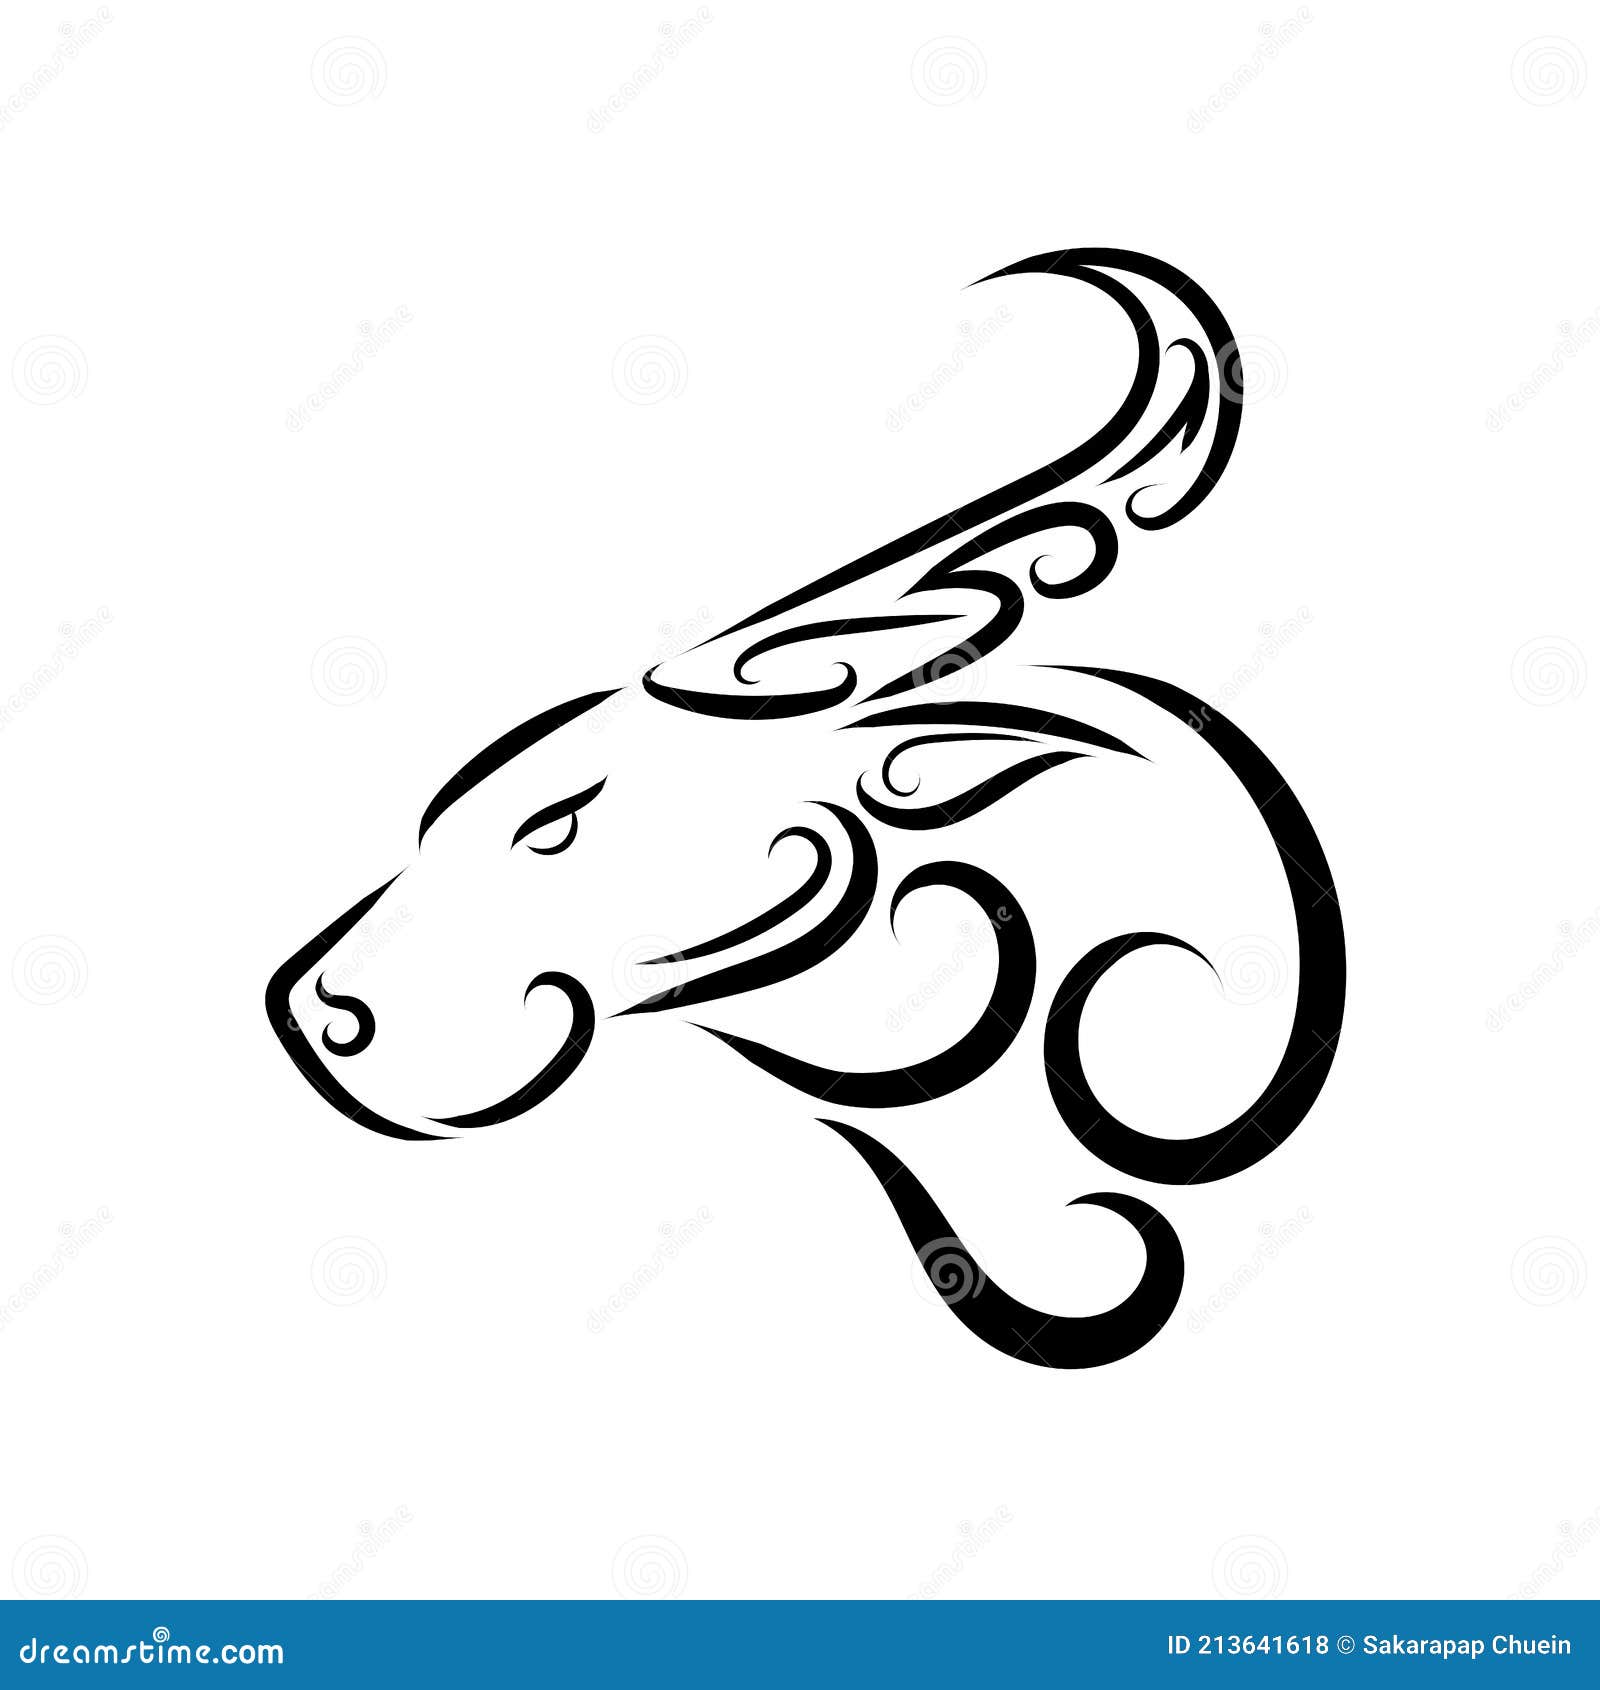 Black and White Line Art of Buffalo Head. Good Use for Symbol, Mascot, Icon, Avatar, Tattoo, T Shirt Design, Logo or Any Design Stock Vector - Illustration of monochrome, drawing: 213641618